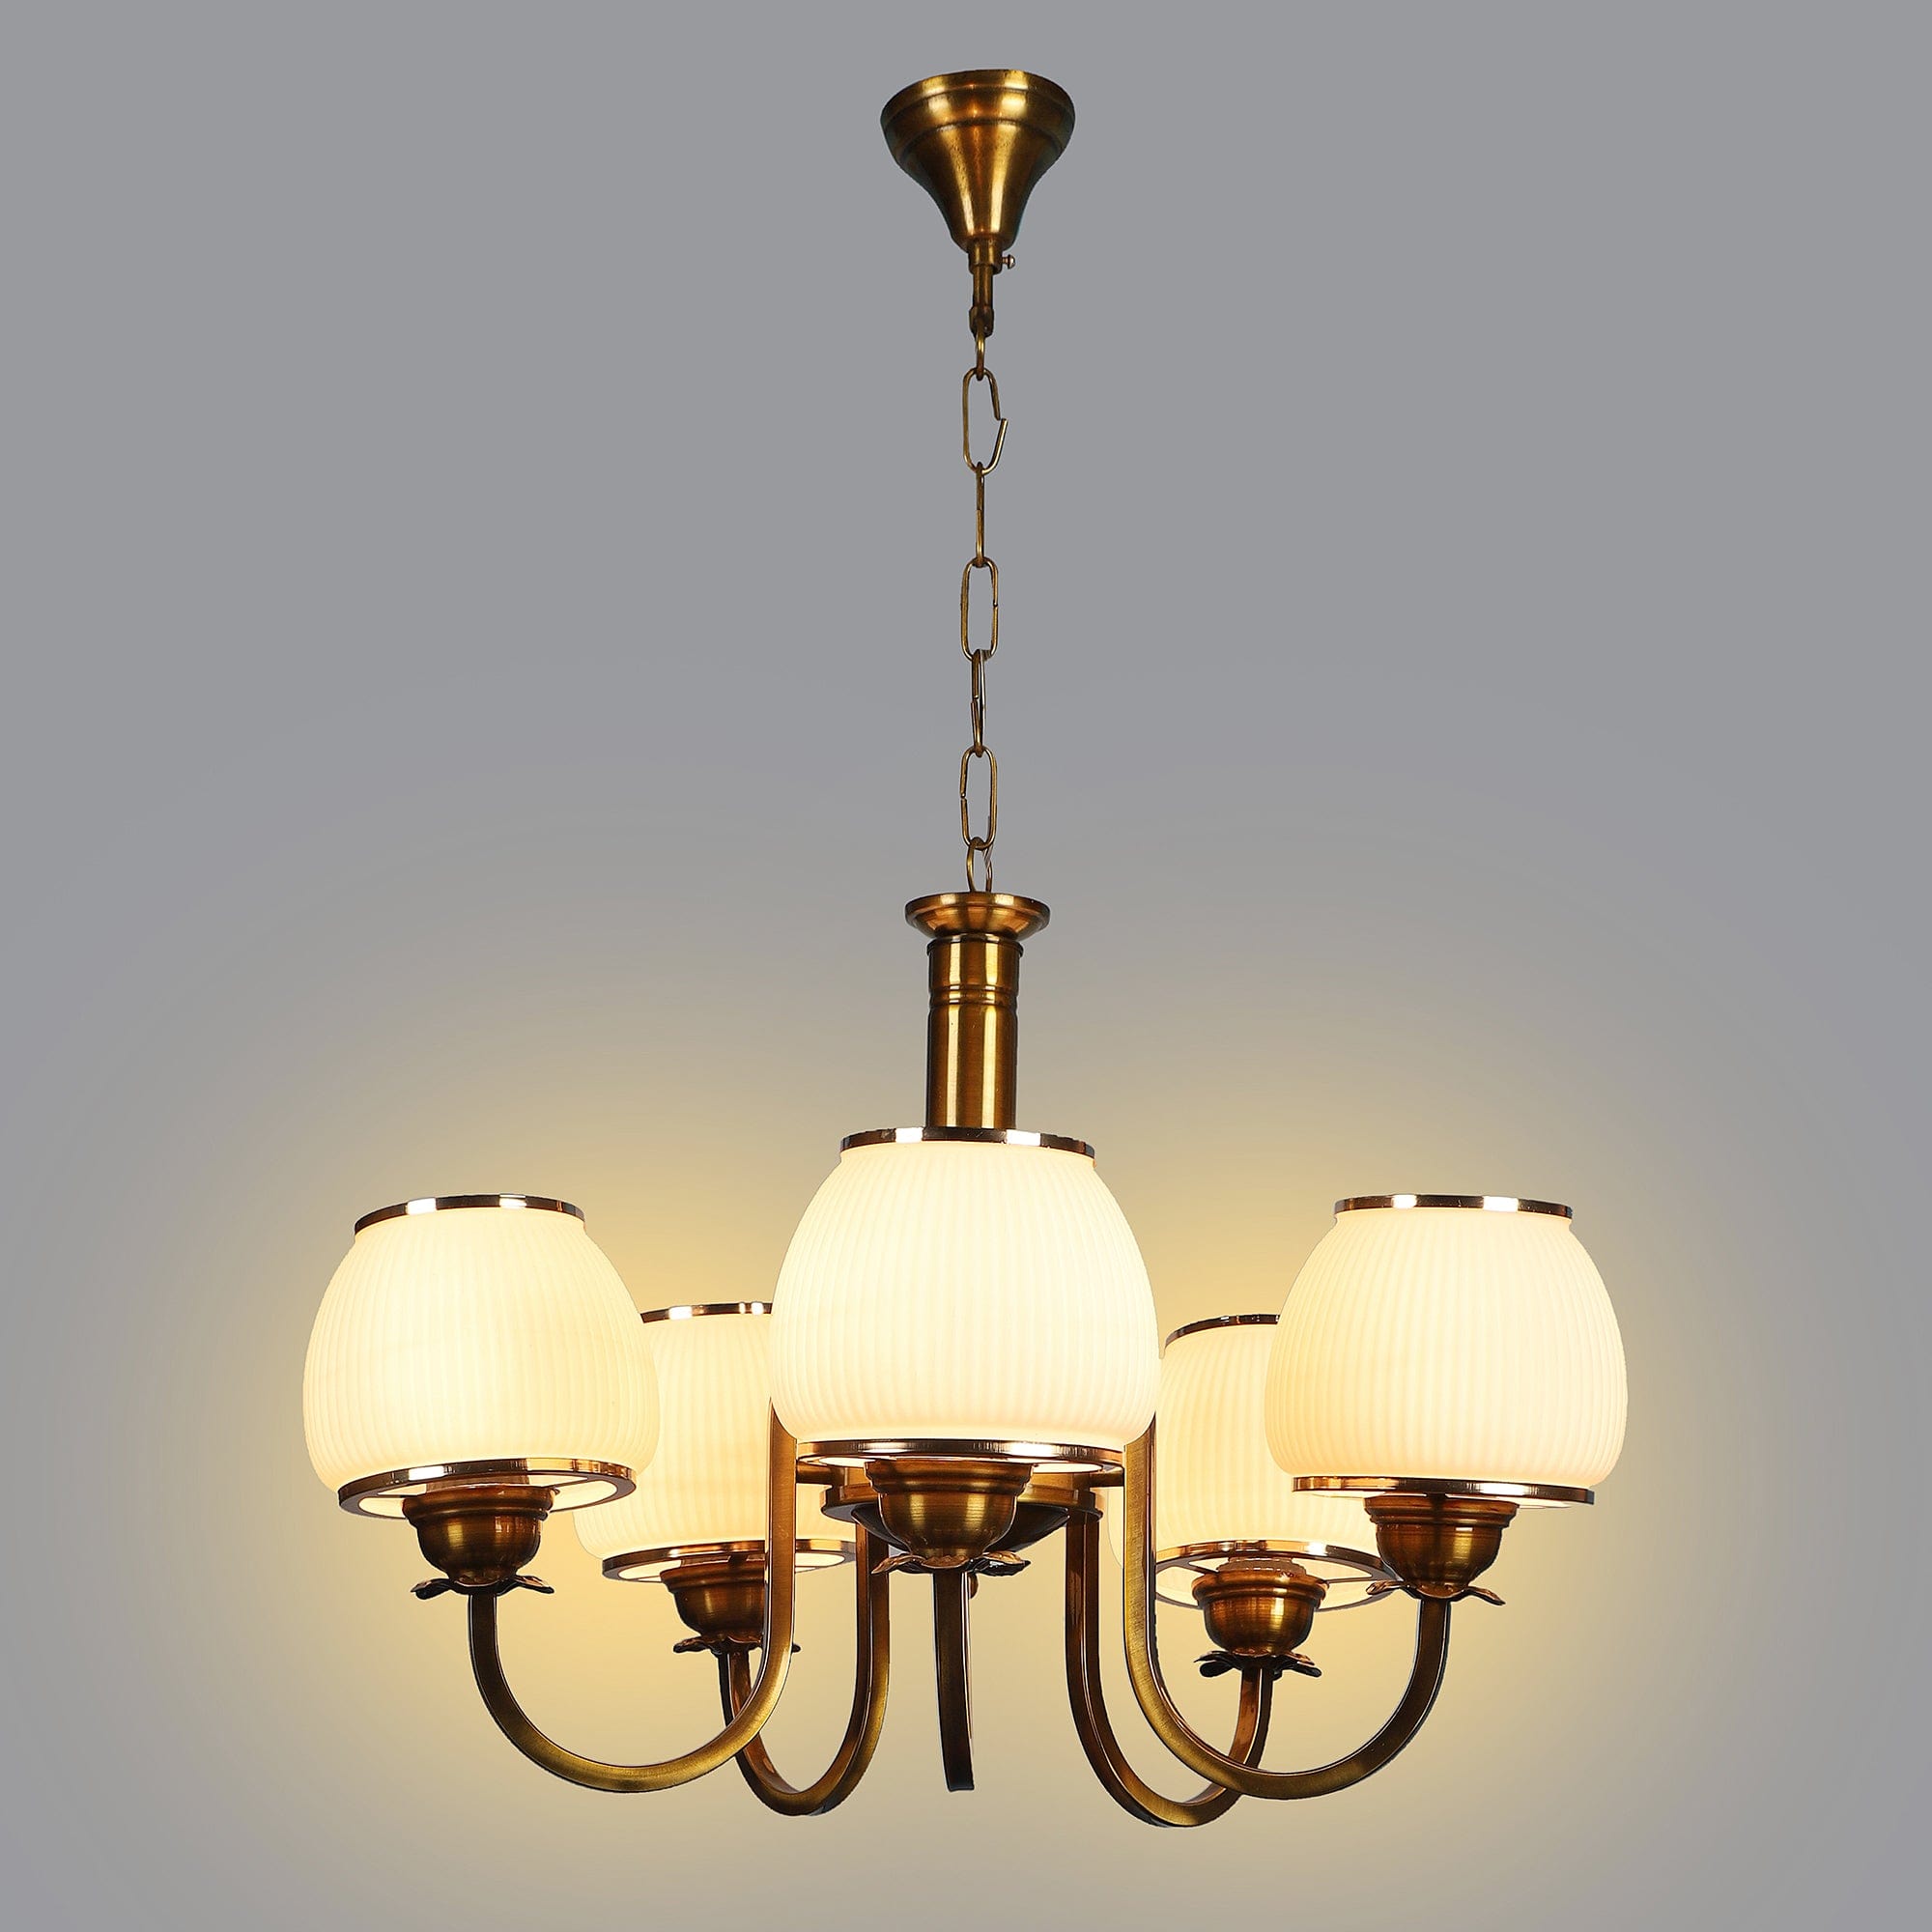 Iron Glass Chandeliers Antique Gold Finish